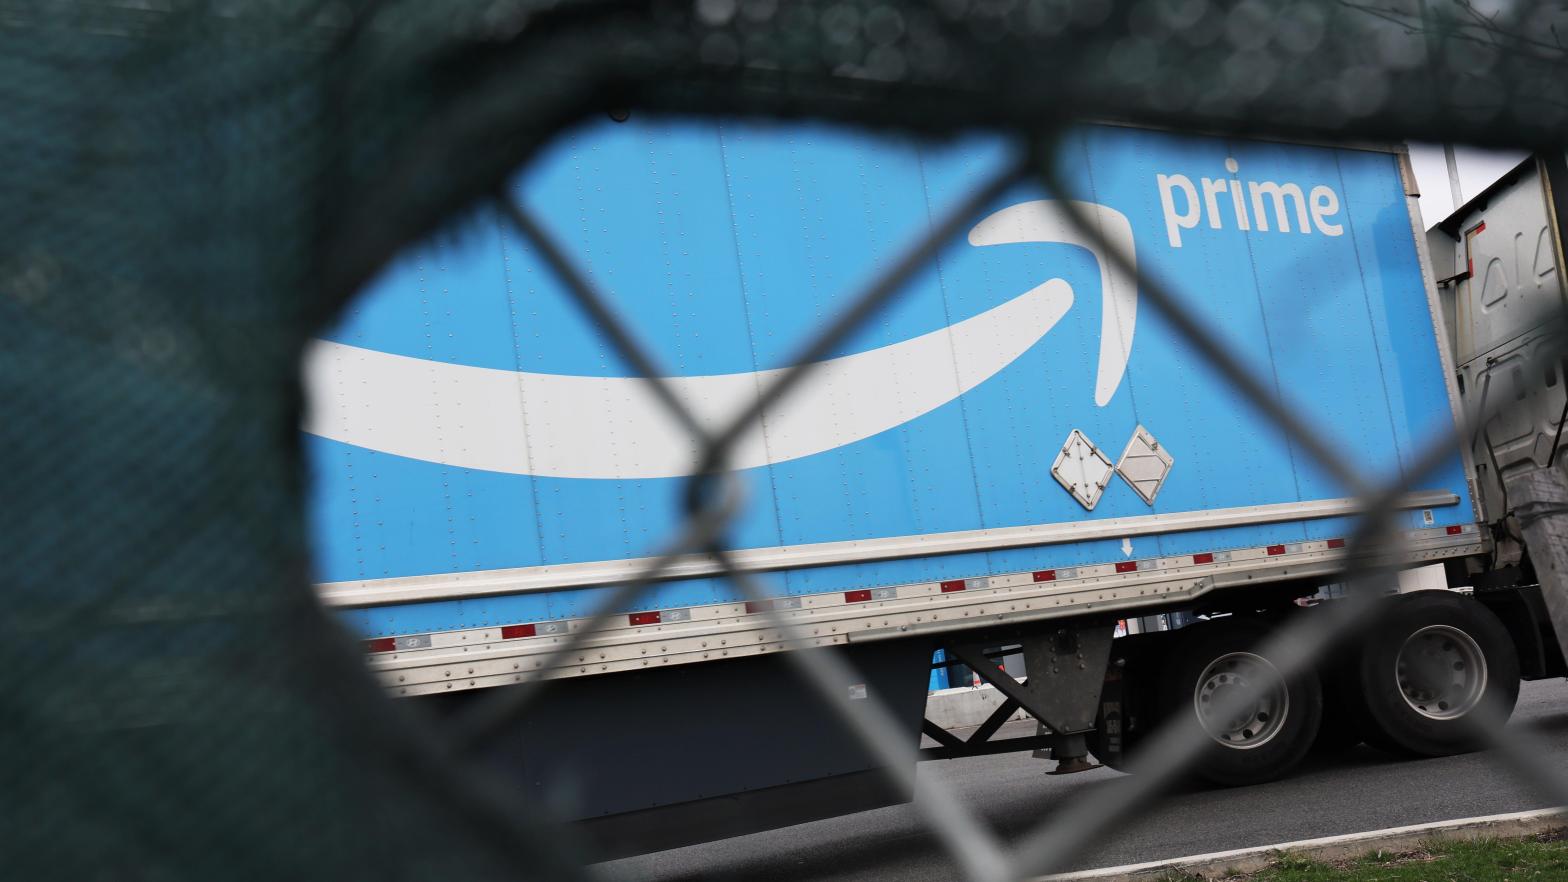 Amazon warehouses have been noted in reports to be high-stress workplaces, leading to major unionization efforts. Amazon, on the other hand, has actively worked to stifle any hint of organised labour. (Photo: Michael M. Santiago, Getty Images)